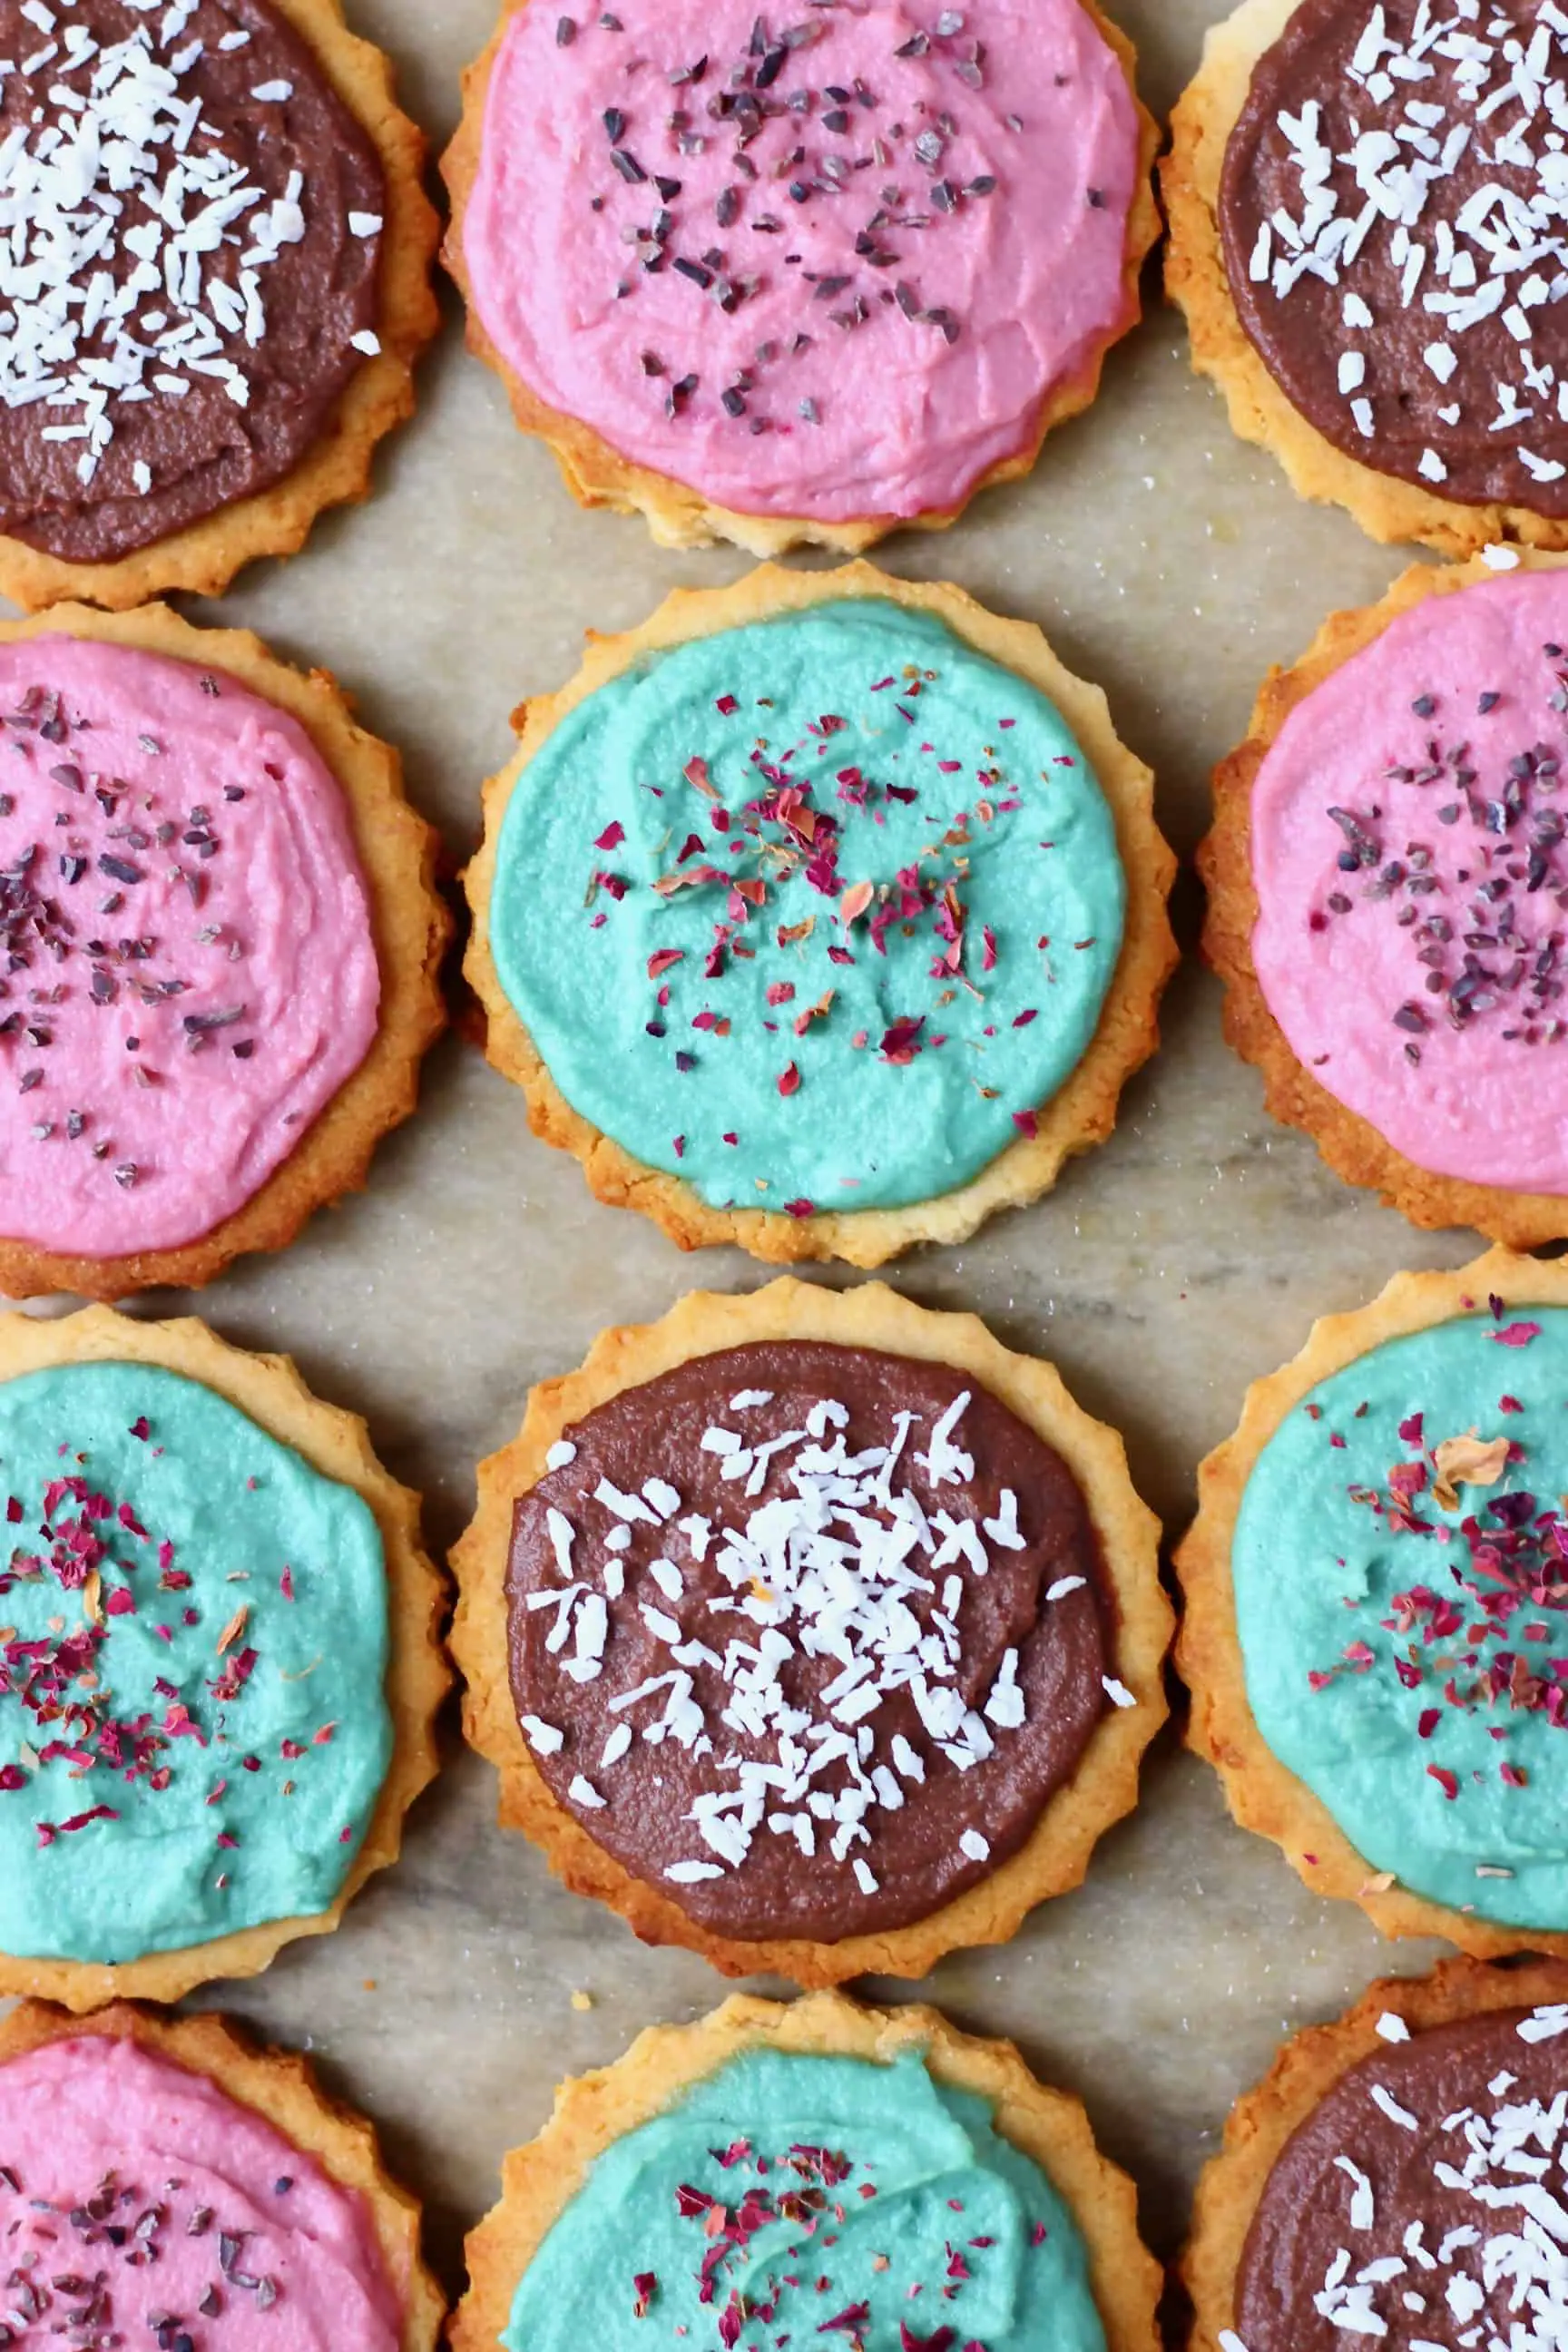 Twelve sugar cookies topped with different coloured frosting and sprinkles on a sheet of brown baking paper